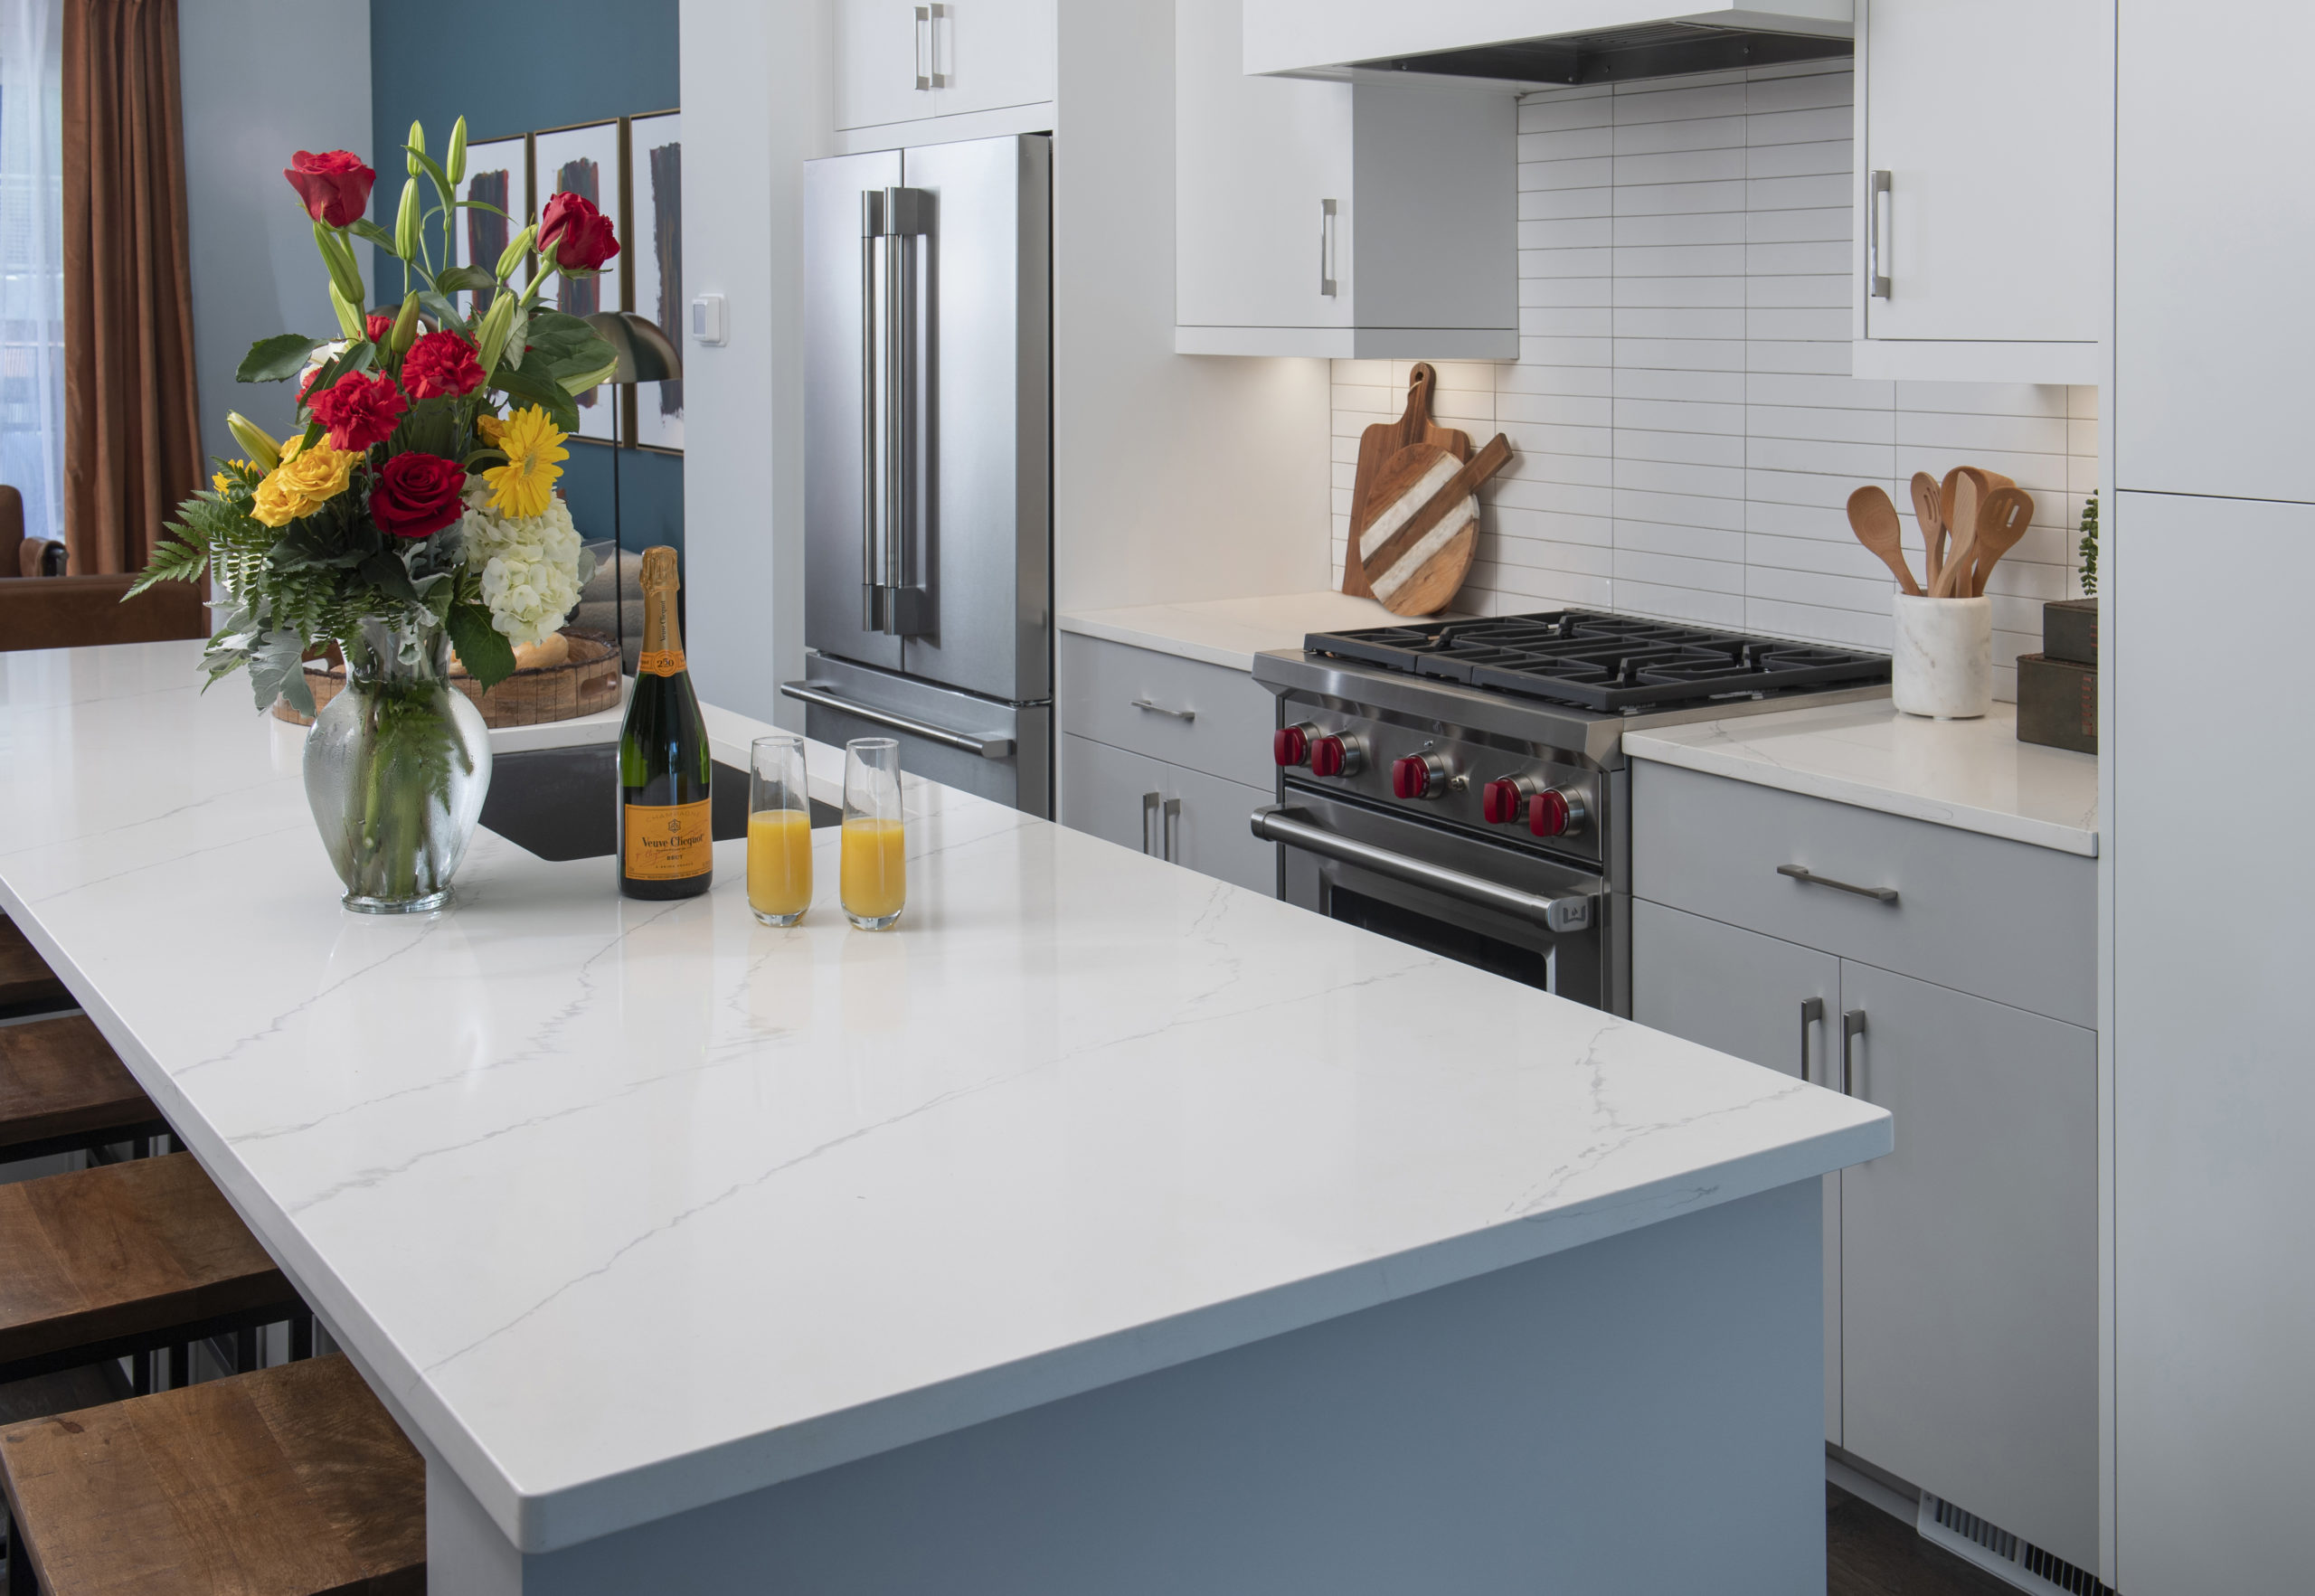 How Countertops can Help Modernize Your Home